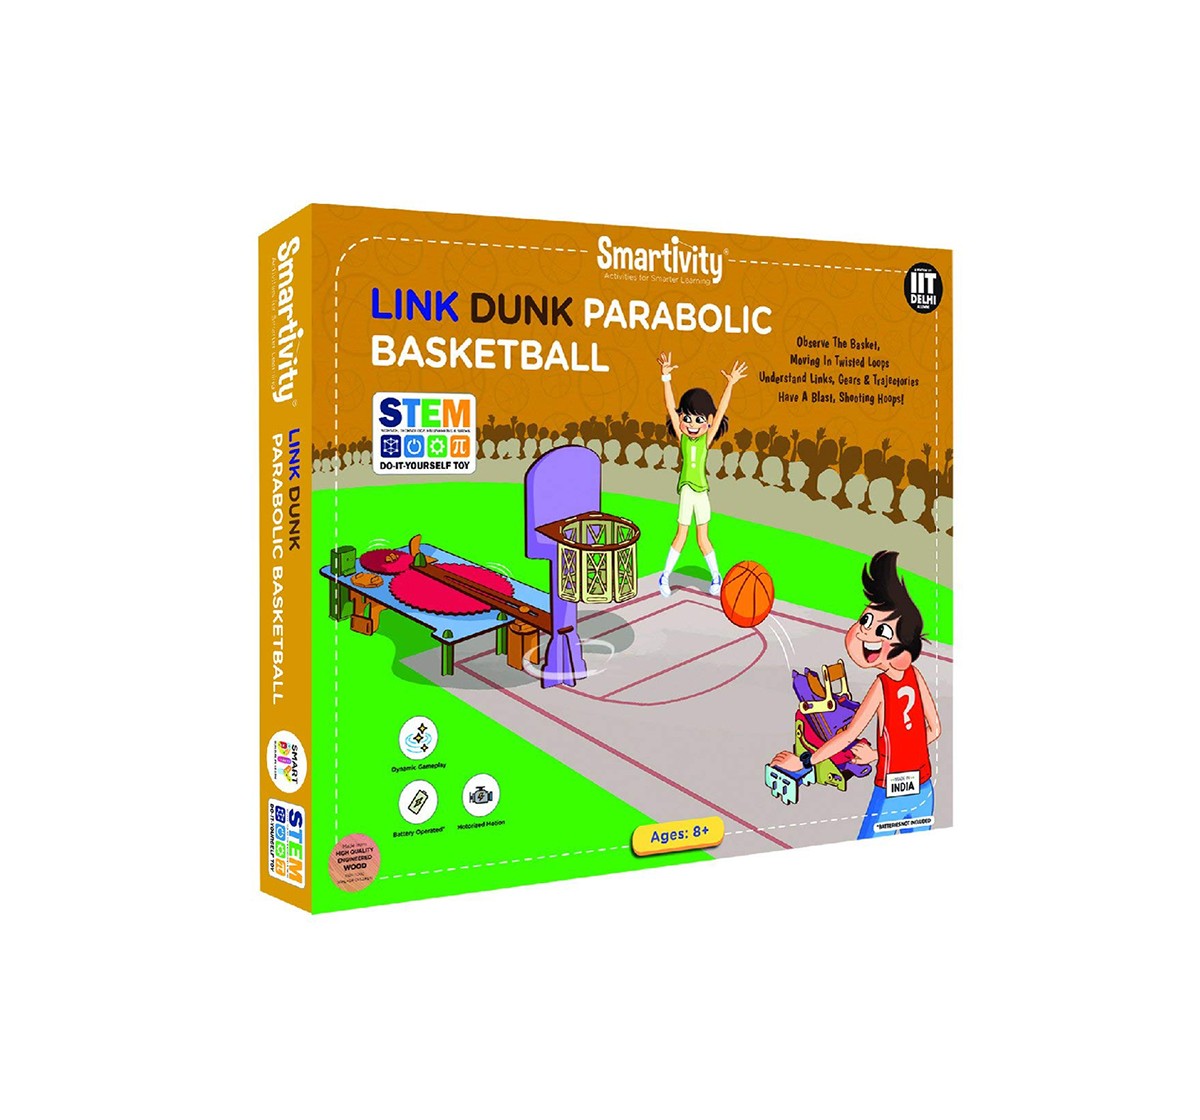 Smartivity Link Dunk Parabolic Basketball: Stem, Learning, Educational and Construction Activity Toy for Kids age 6Y+ 